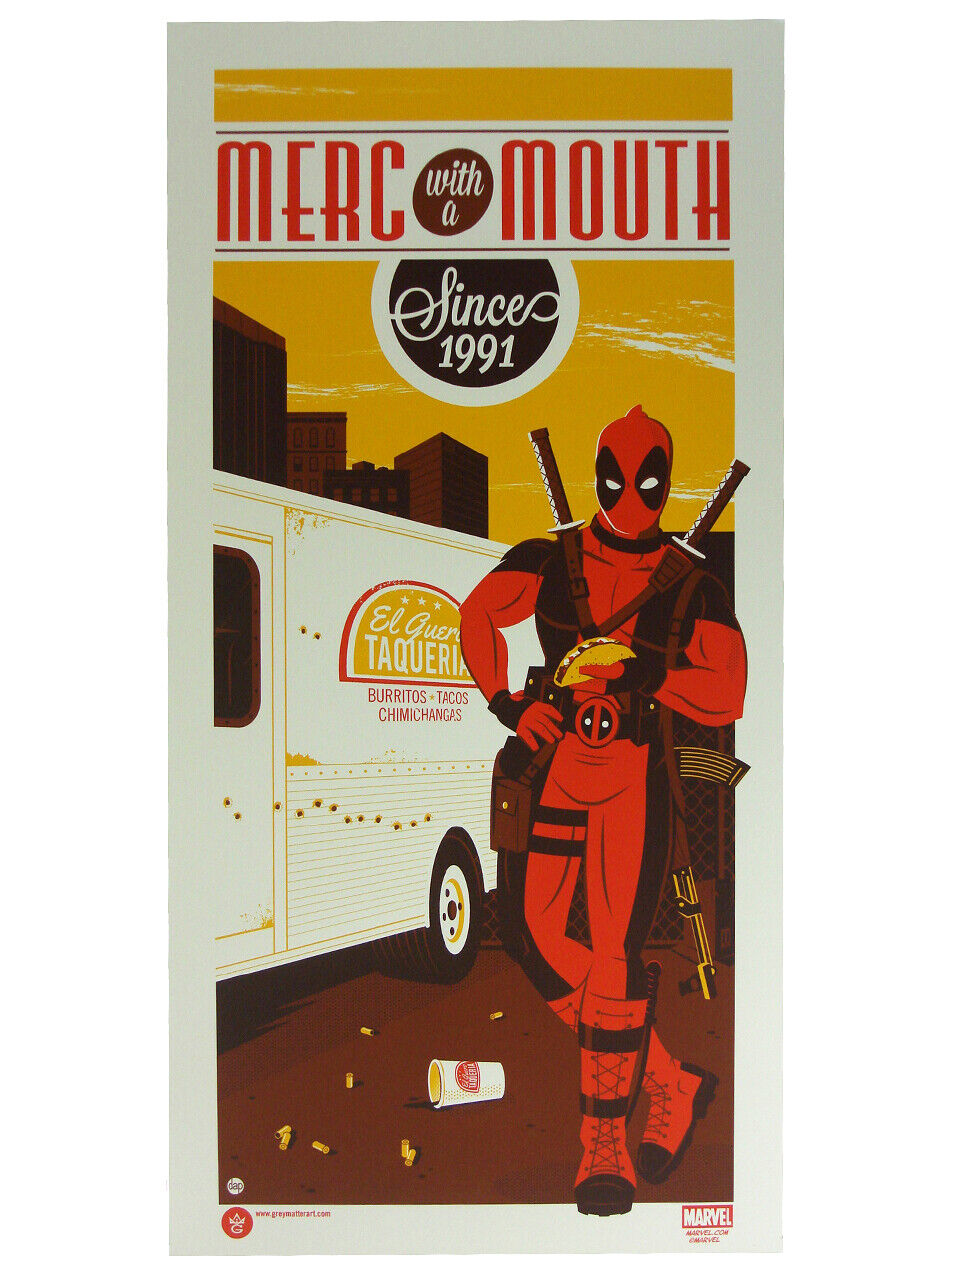 Deadpool Dave Perillo Screenprint Merc With Mouth Since 1991 Grey Matter Marvel